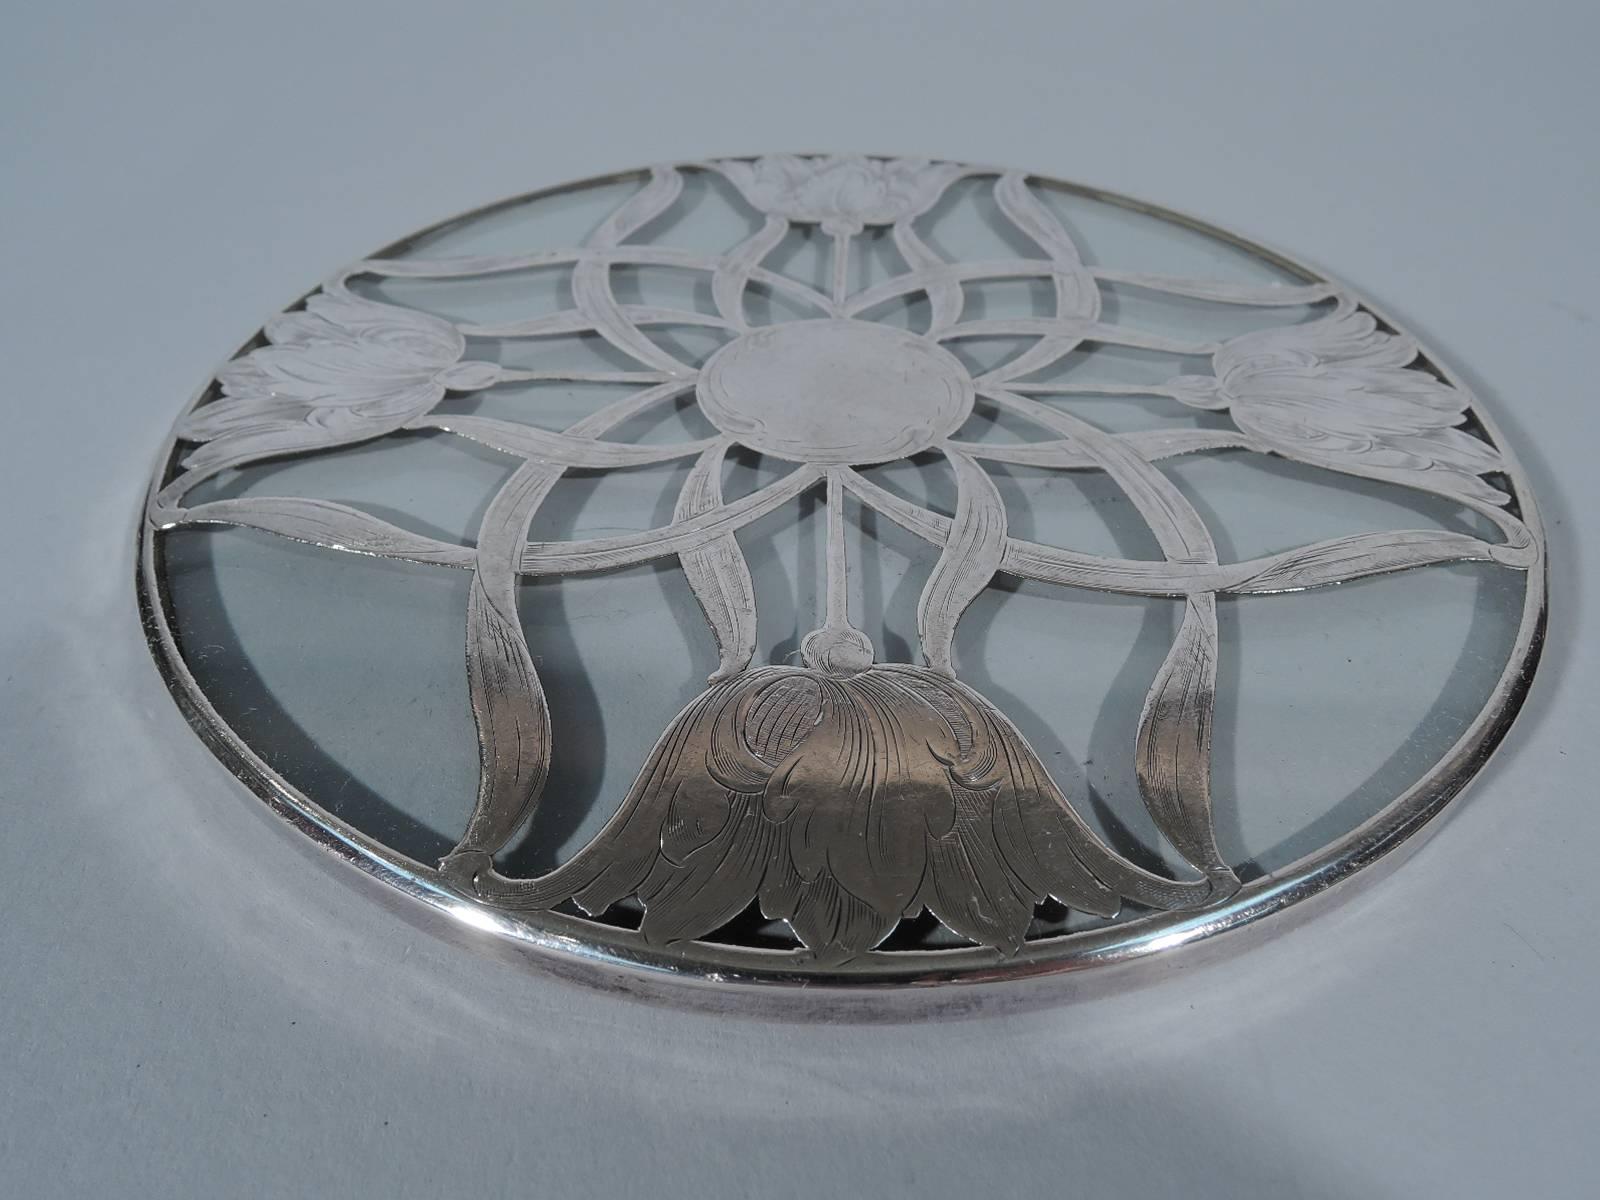 Art Nouveau clear glass trivet with floral silver overlay. Open blooms brush against the rim and the stems and leaves intertwine to form a central star with solid center (vacant). Faint hallmark. Very good condition and patina.

Dimensions: H 1/4